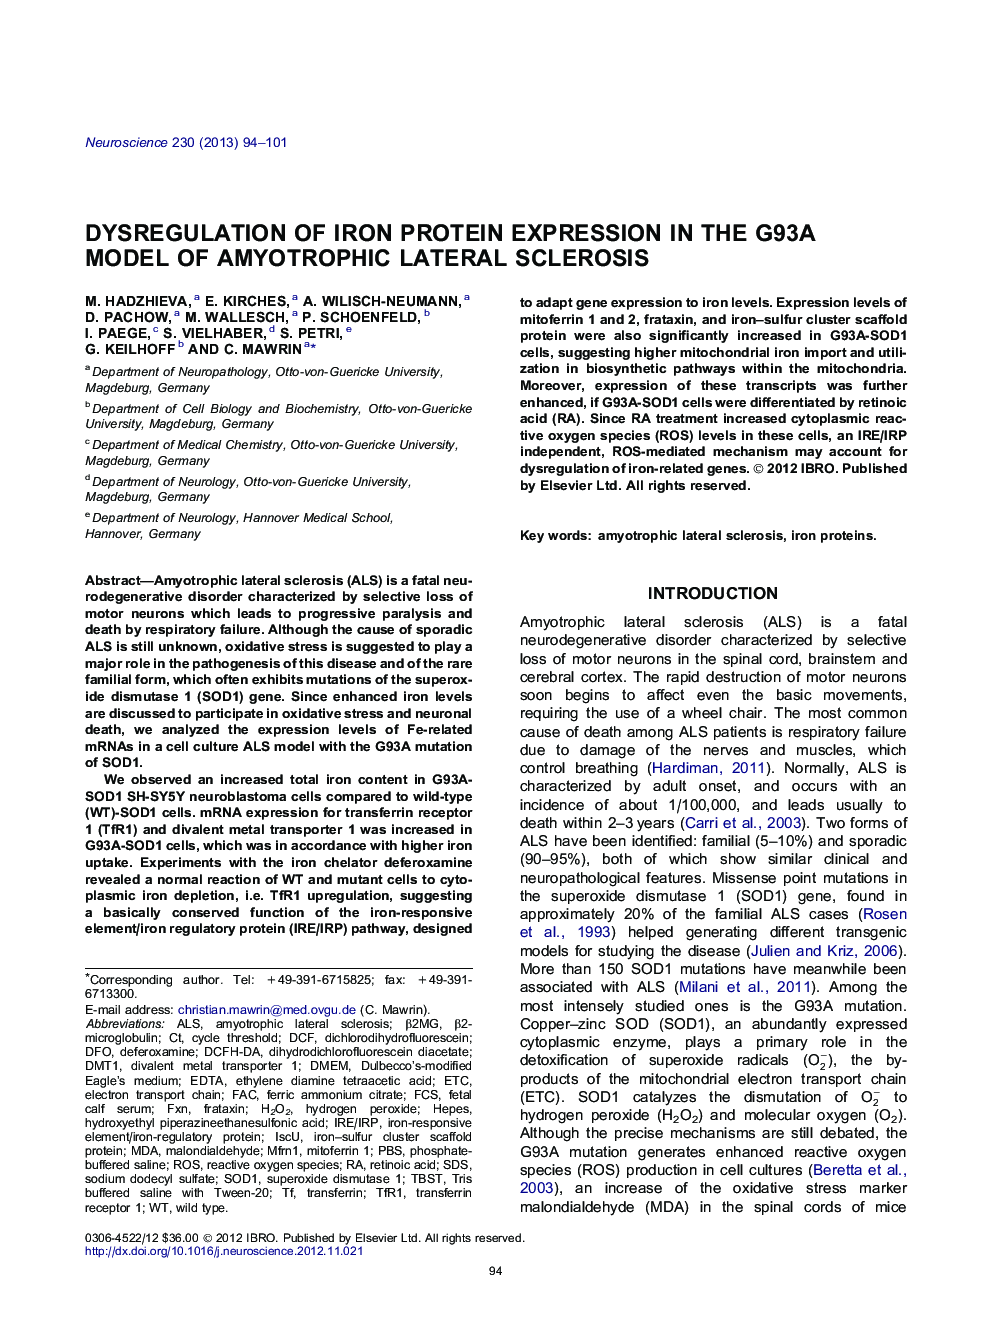 Dysregulation of iron protein expression in the G93A model of amyotrophic lateral sclerosis